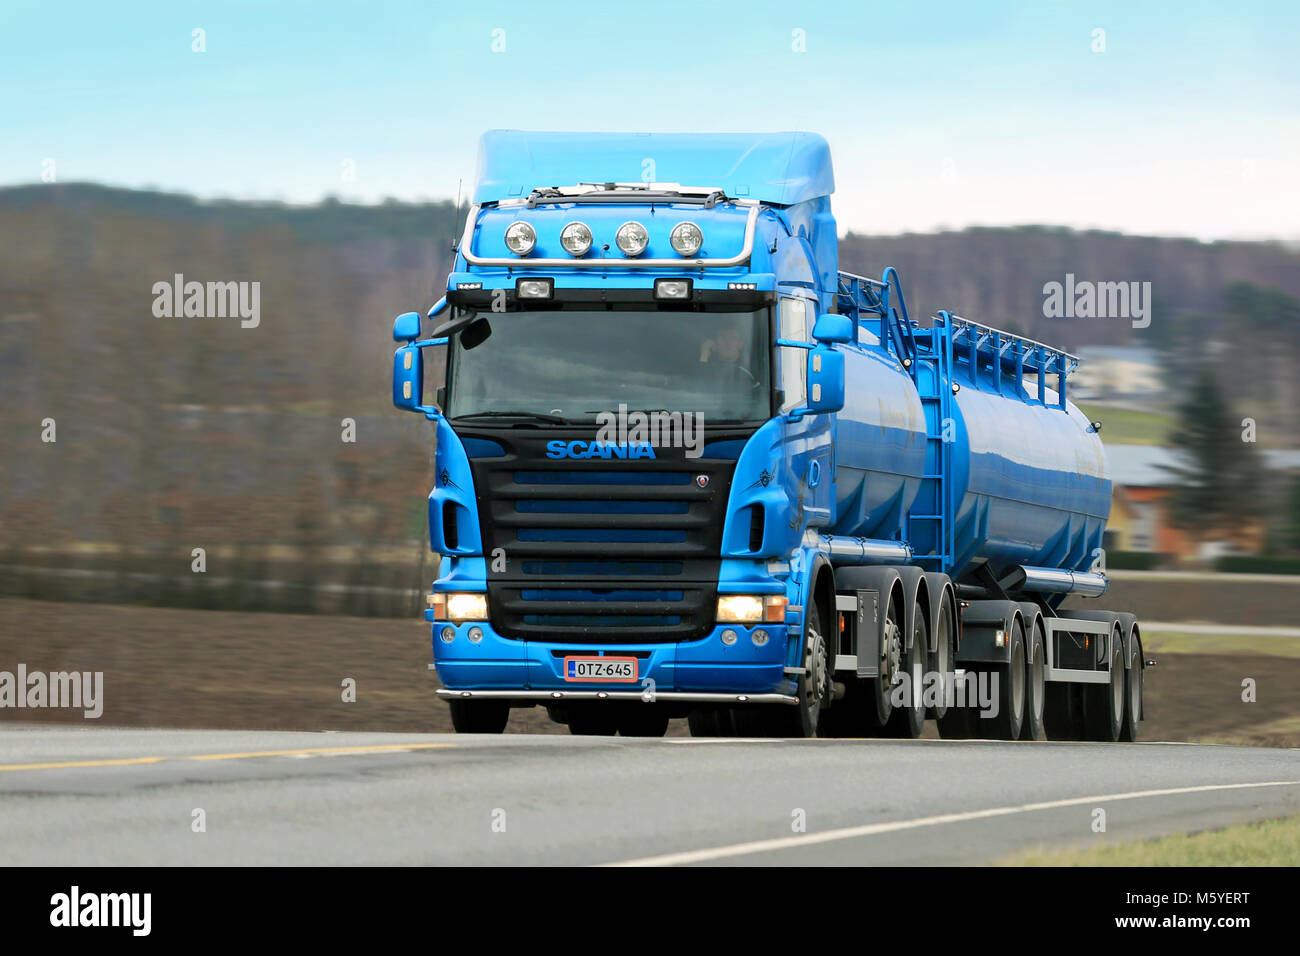 SALO, FINLAND - APRIL 3, 2015: Scania R500 tank truck on highway no. 52. Study shows Scania supplies the most efficient alternative fuel technology. Stock Photo